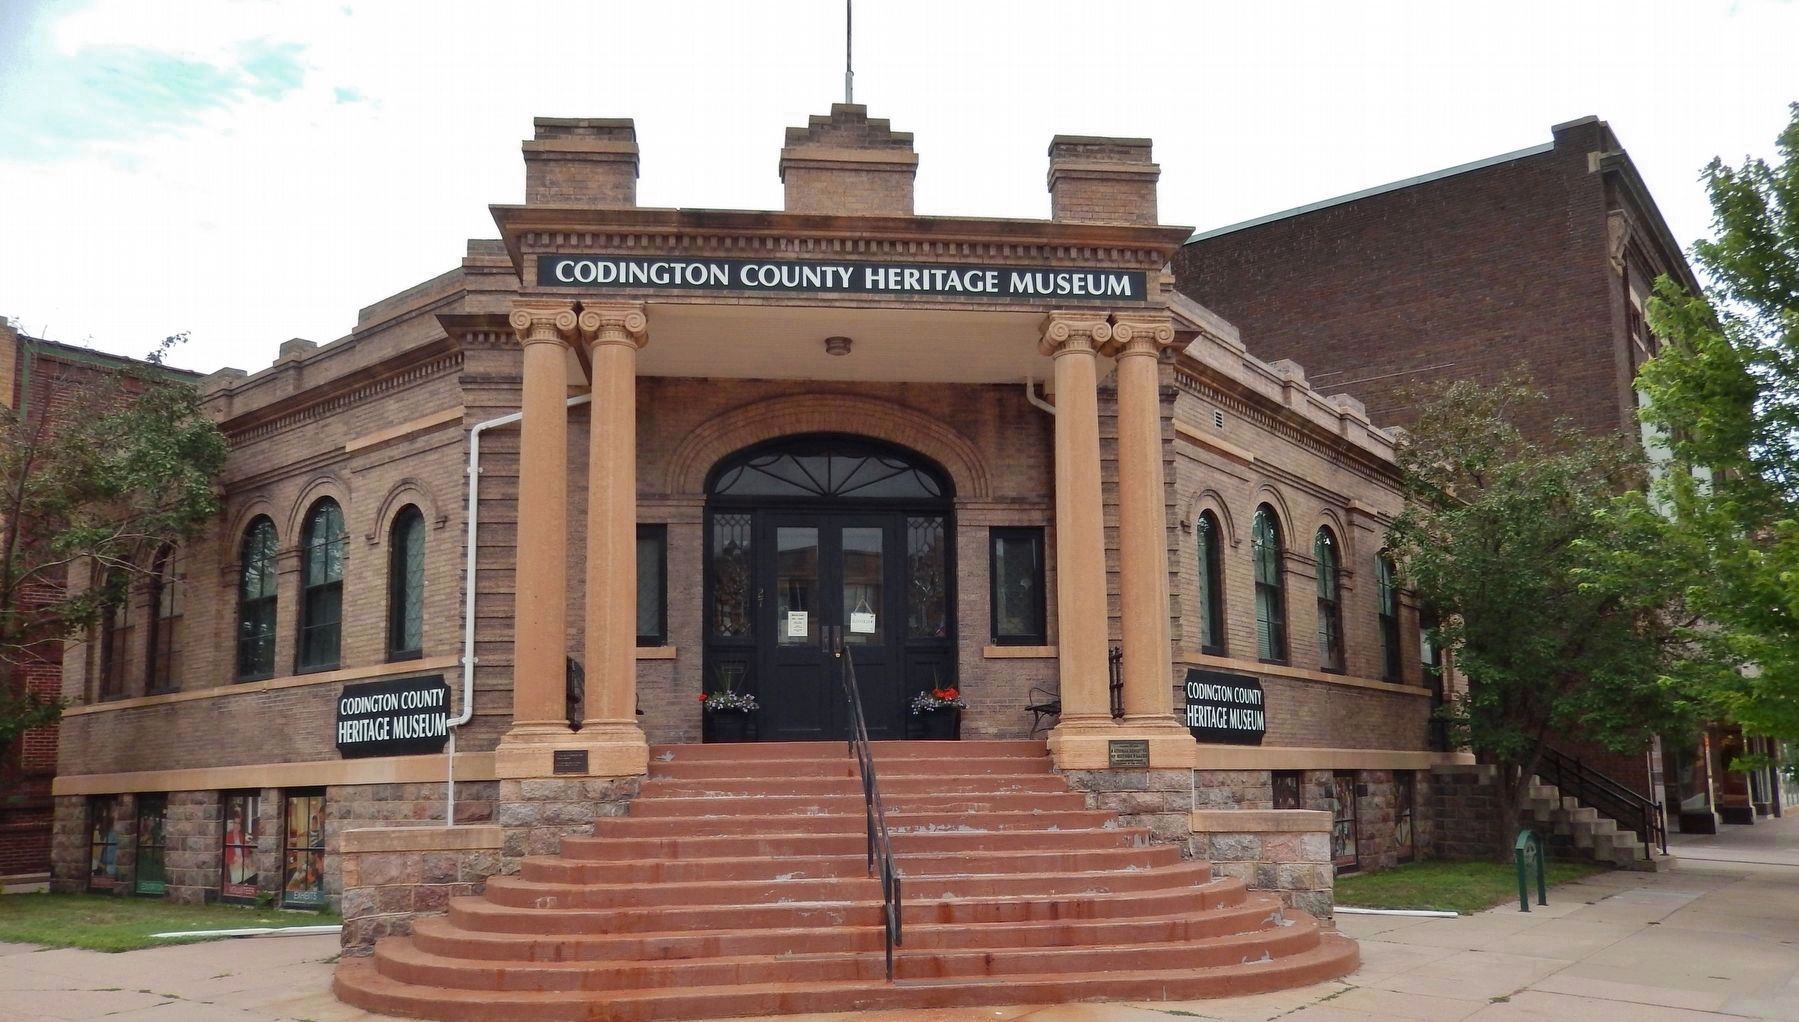 Carnegie Free Public Library (<i>now Codington County Heritage Museum</i>) image. Click for full size.